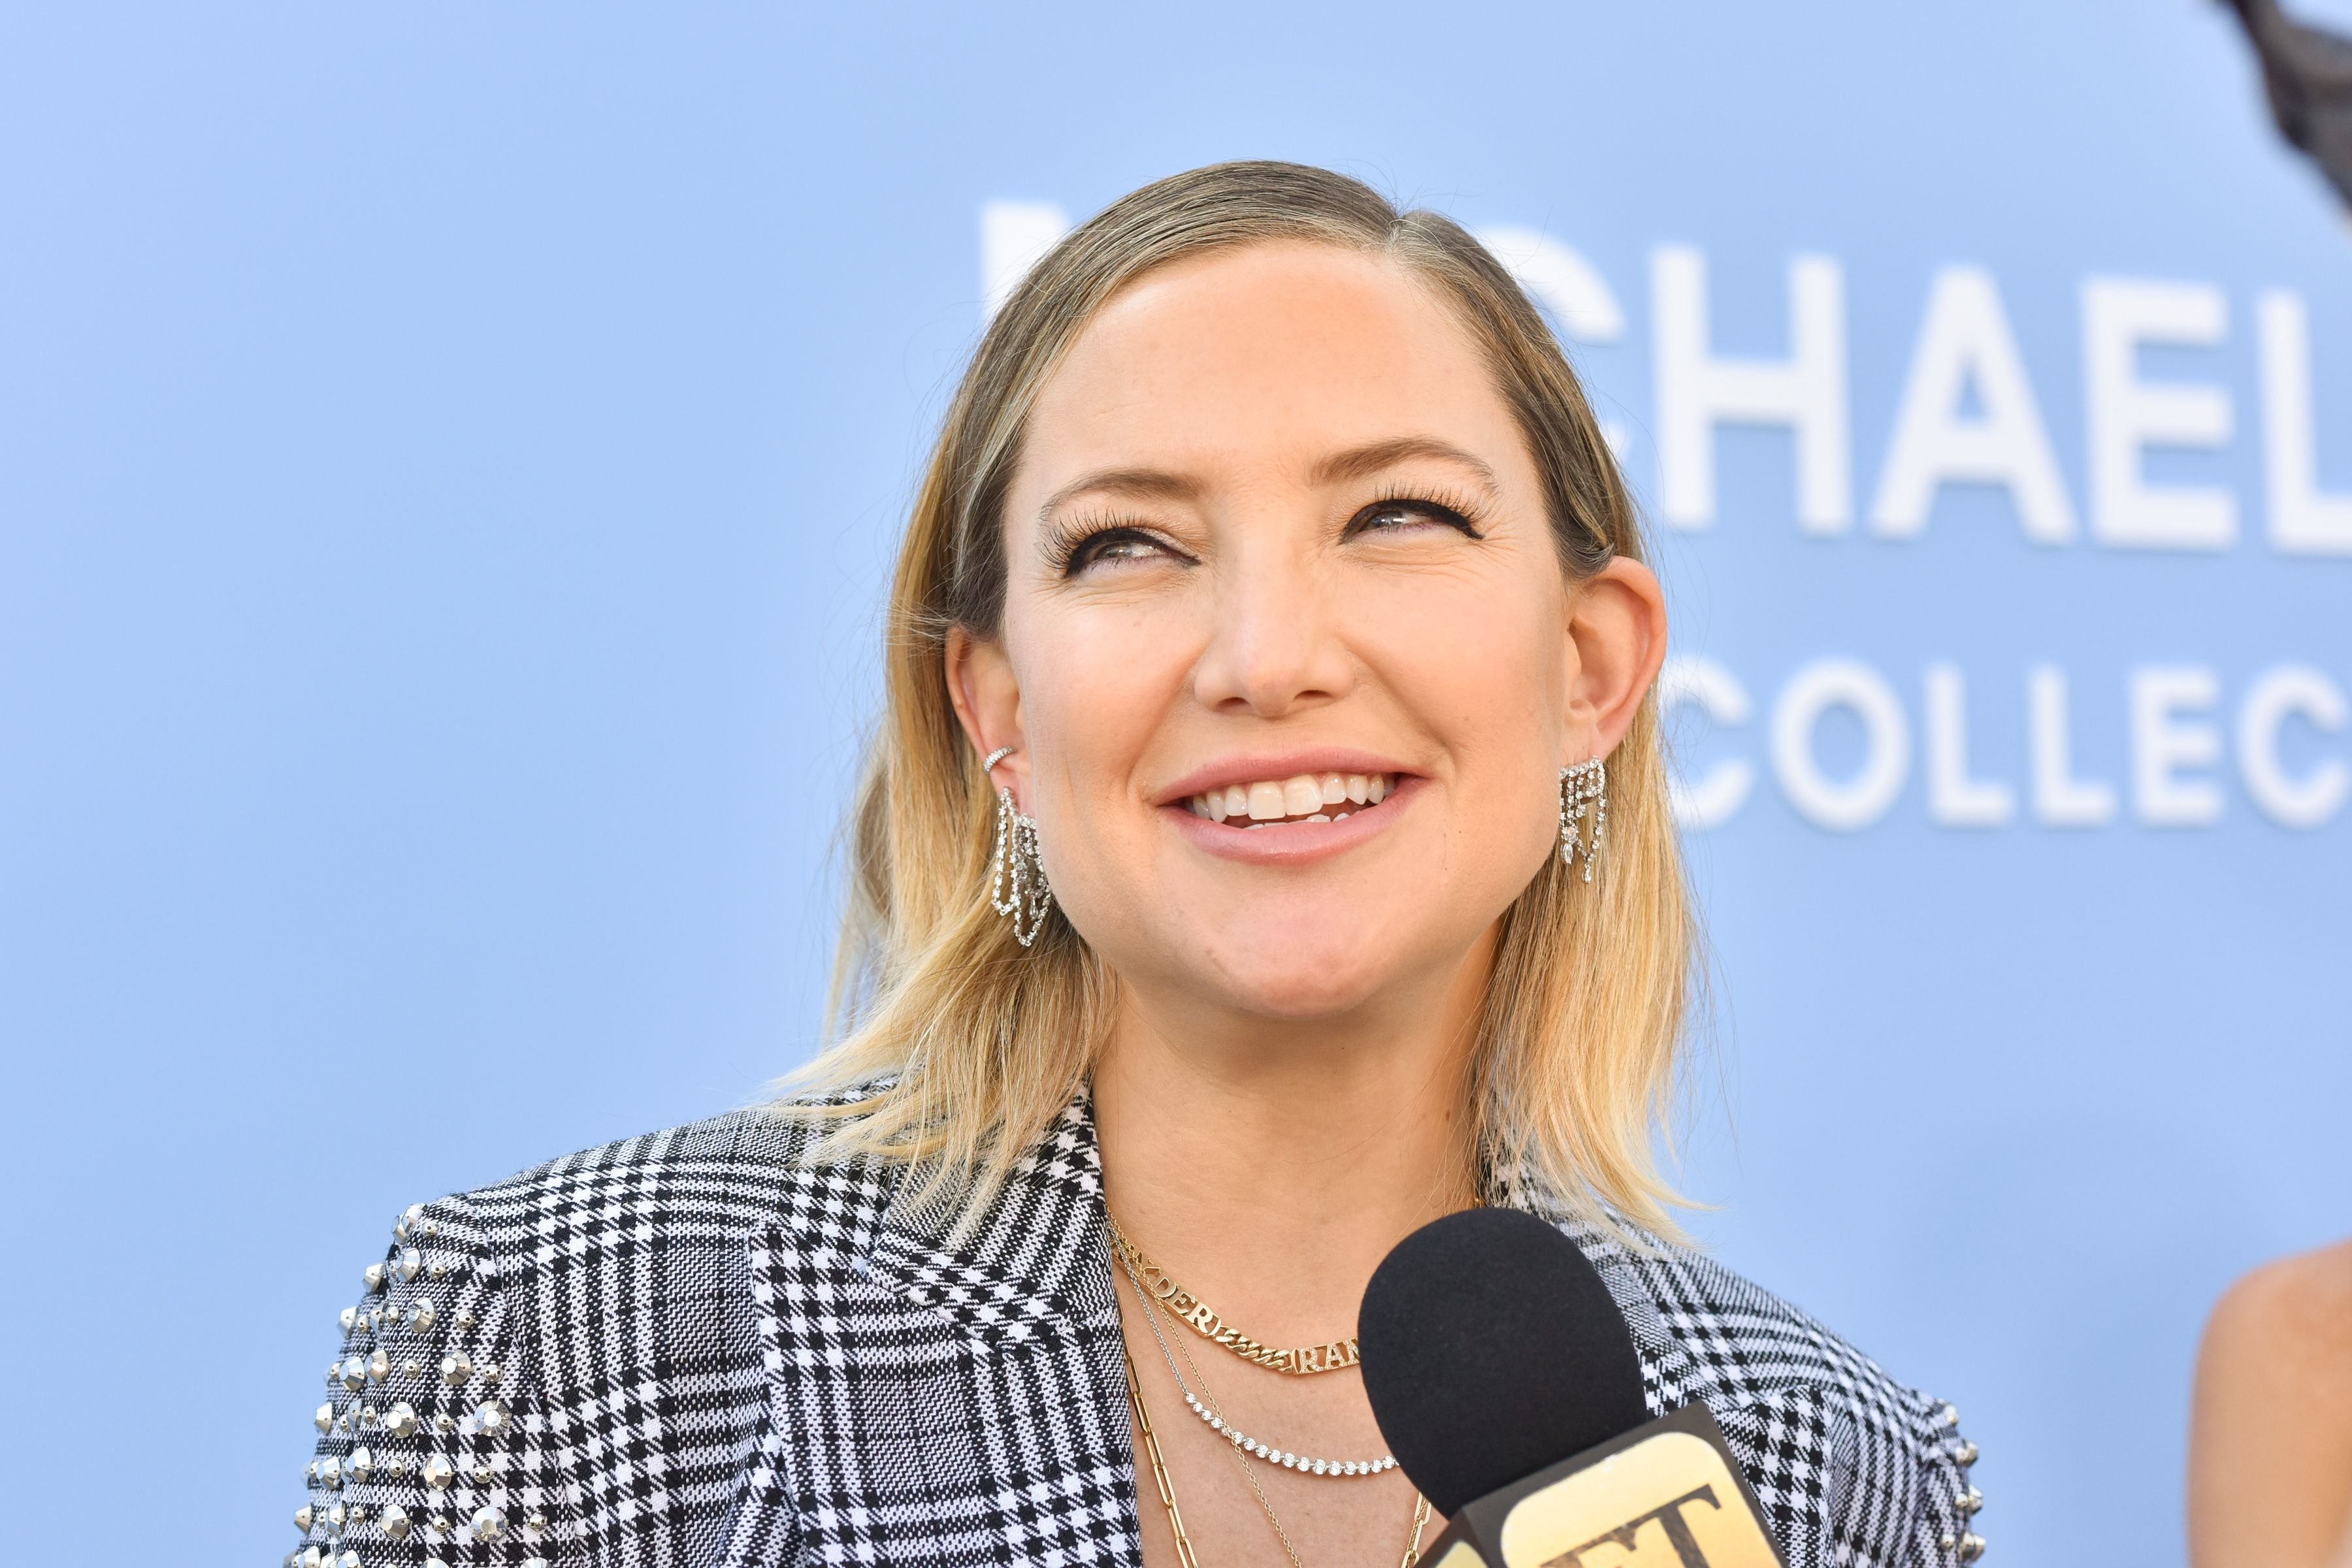  Kate Hudson at the Michael Kors S/S 2020 Fashion Show at Duggal Greenhouse on September 11, 2019 | Getty Images